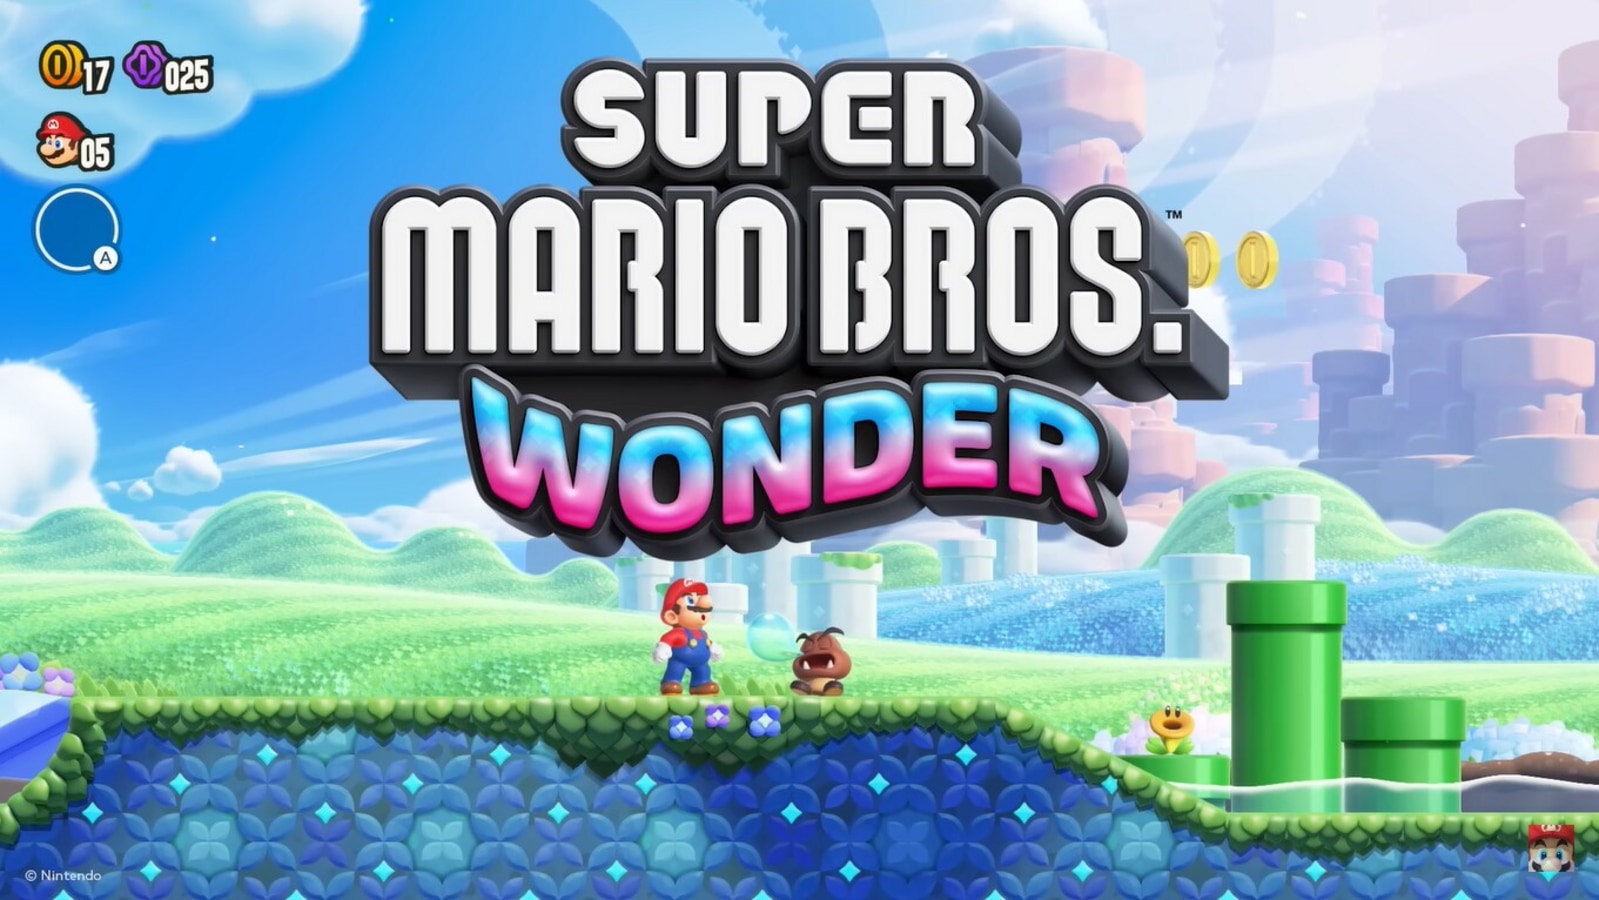 Check out the first Super Mario Bros. Wonder Commercial - World of